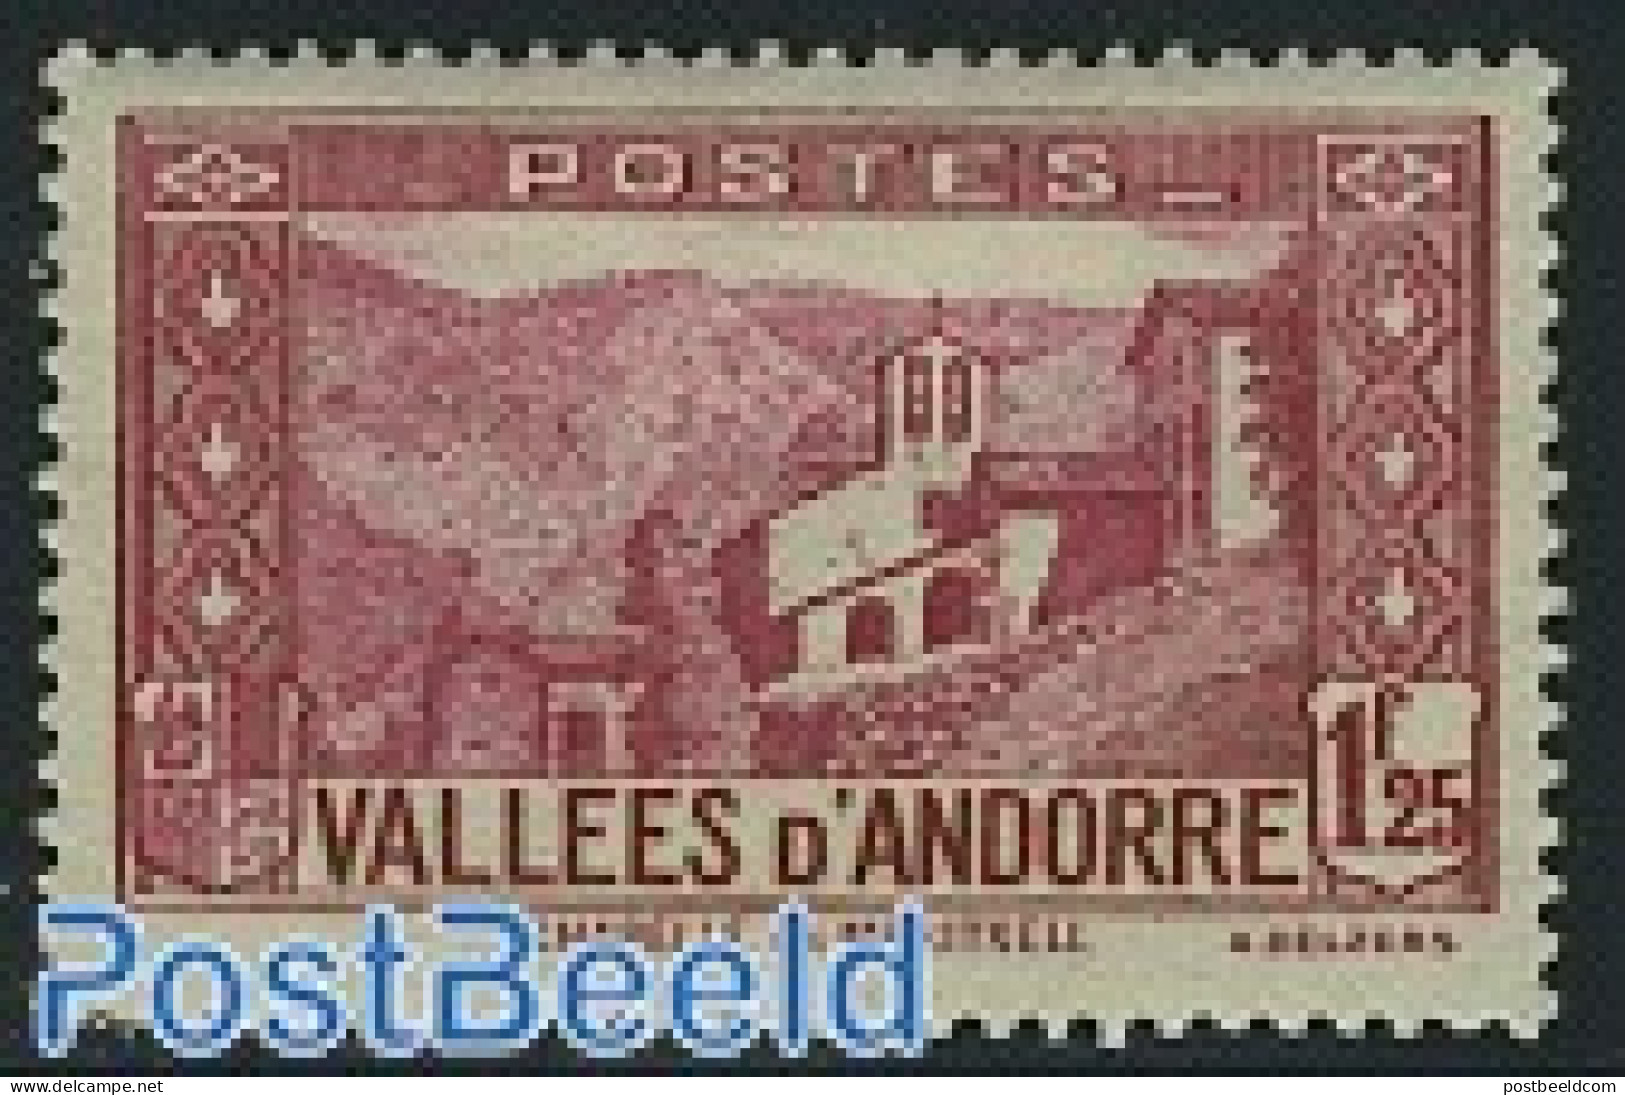 Andorra, French Post 1933 1.25F, Stamp Out Of Set, Unused (hinged), Religion - Churches, Temples, Mosques, Synagogues - Unused Stamps